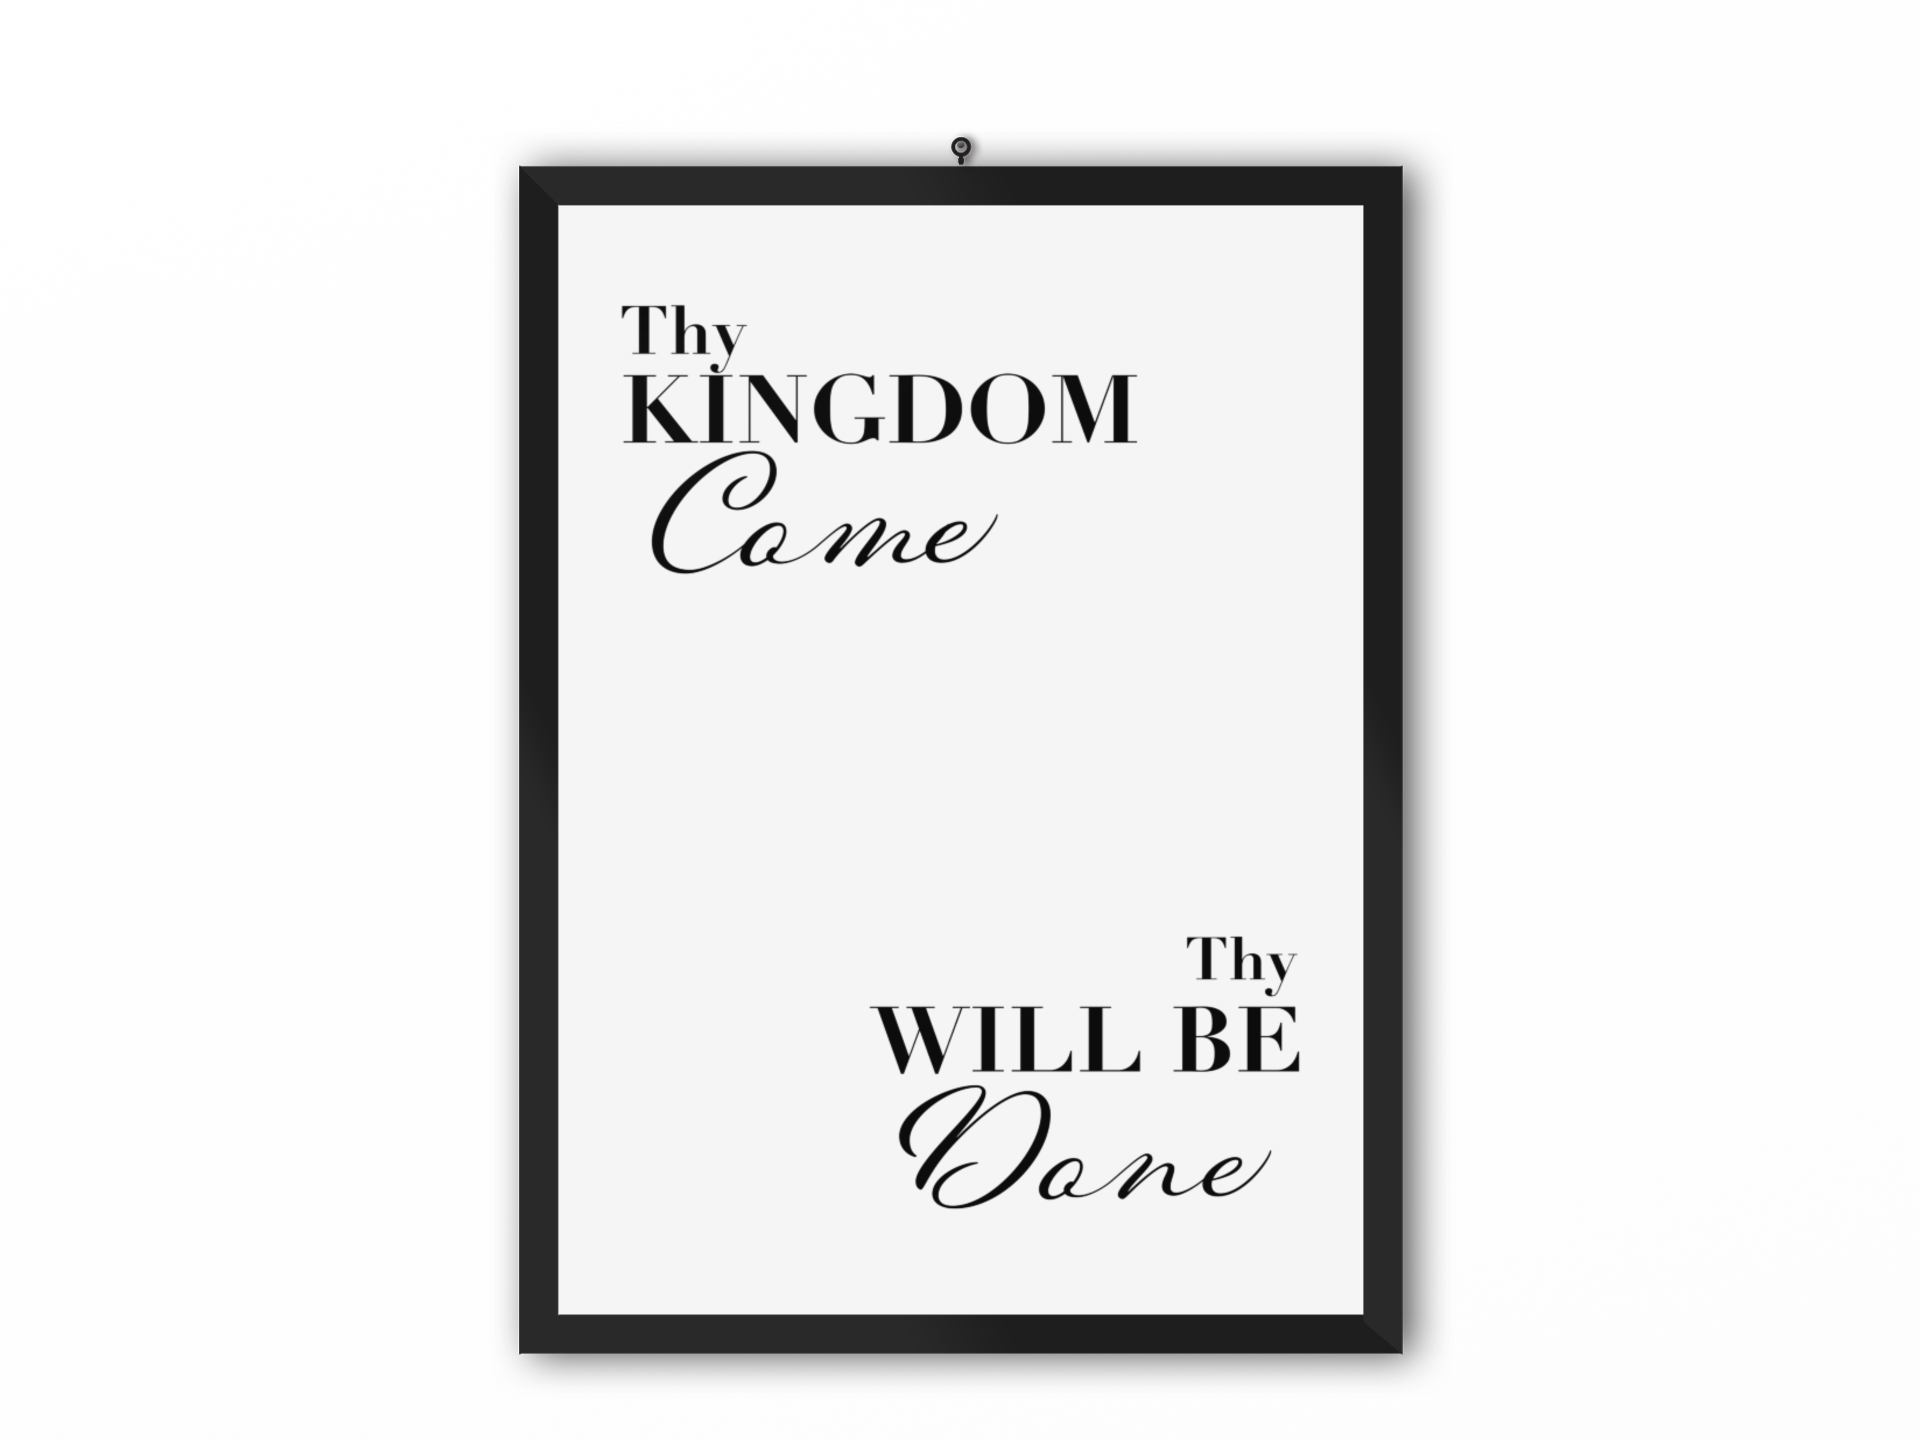 Thy Kingdom Come - Thy Will Be Done print - Faith Curated